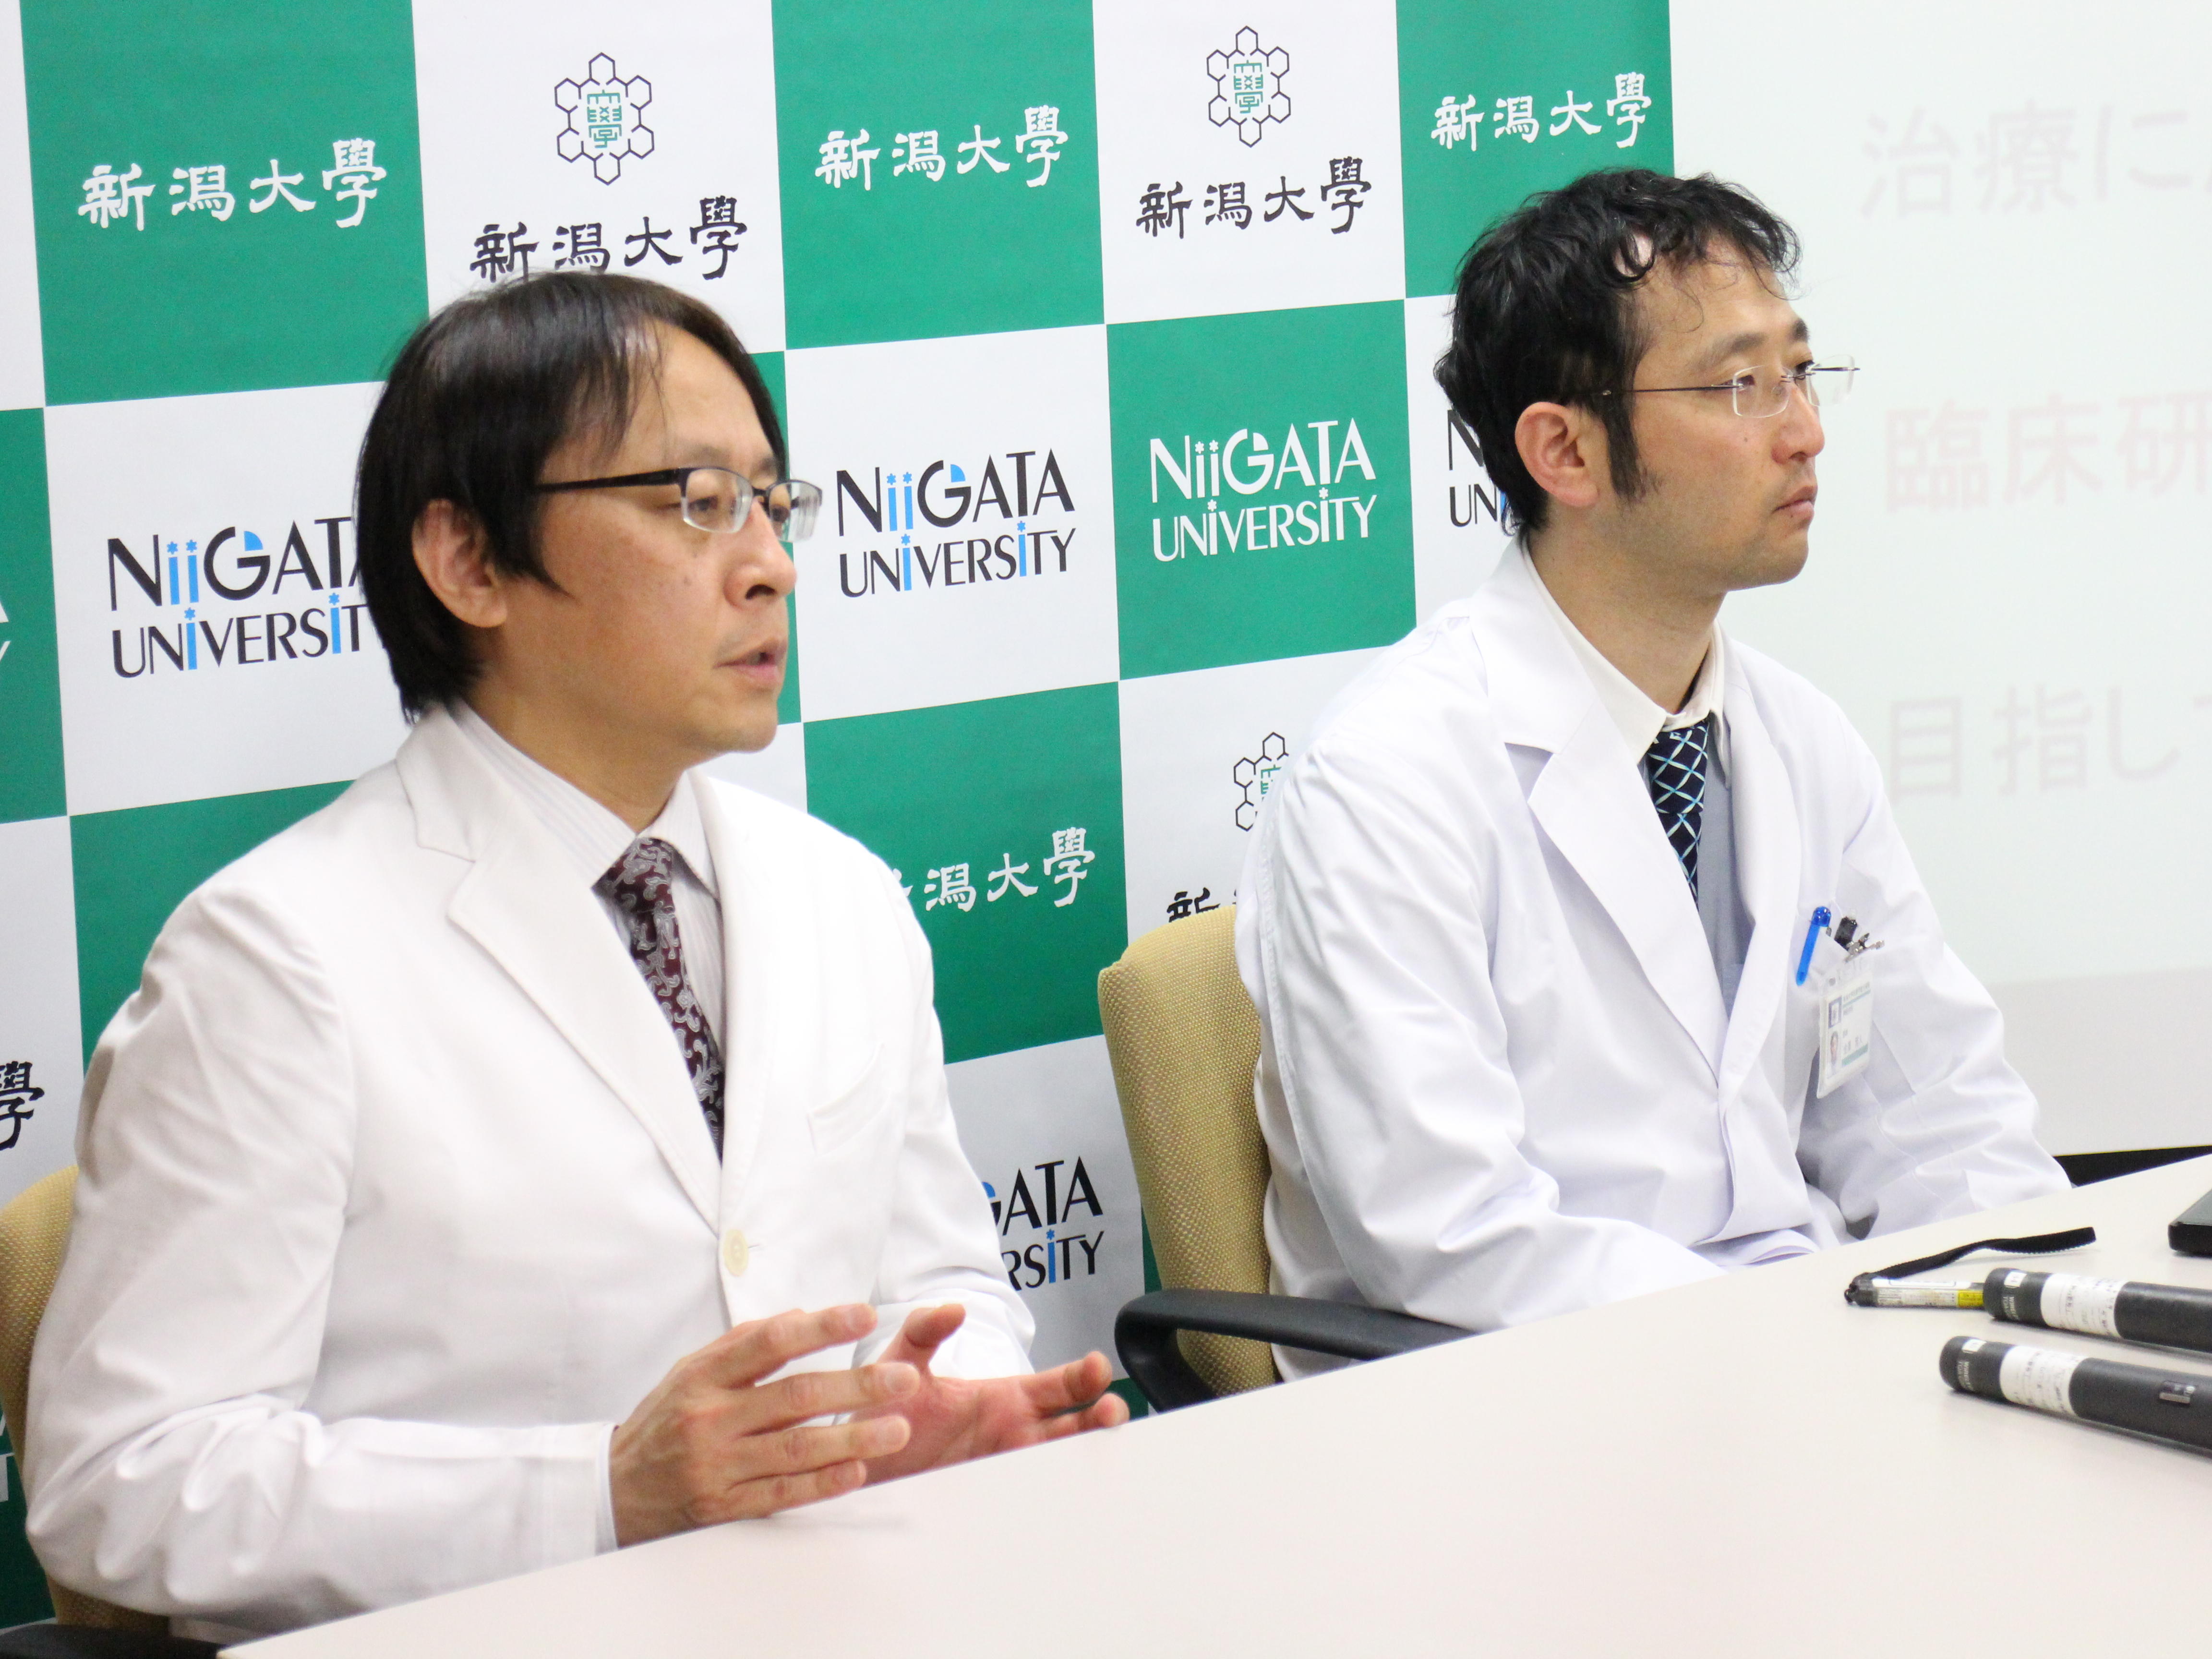 Press conference held for the research findings relating ischemic stroke